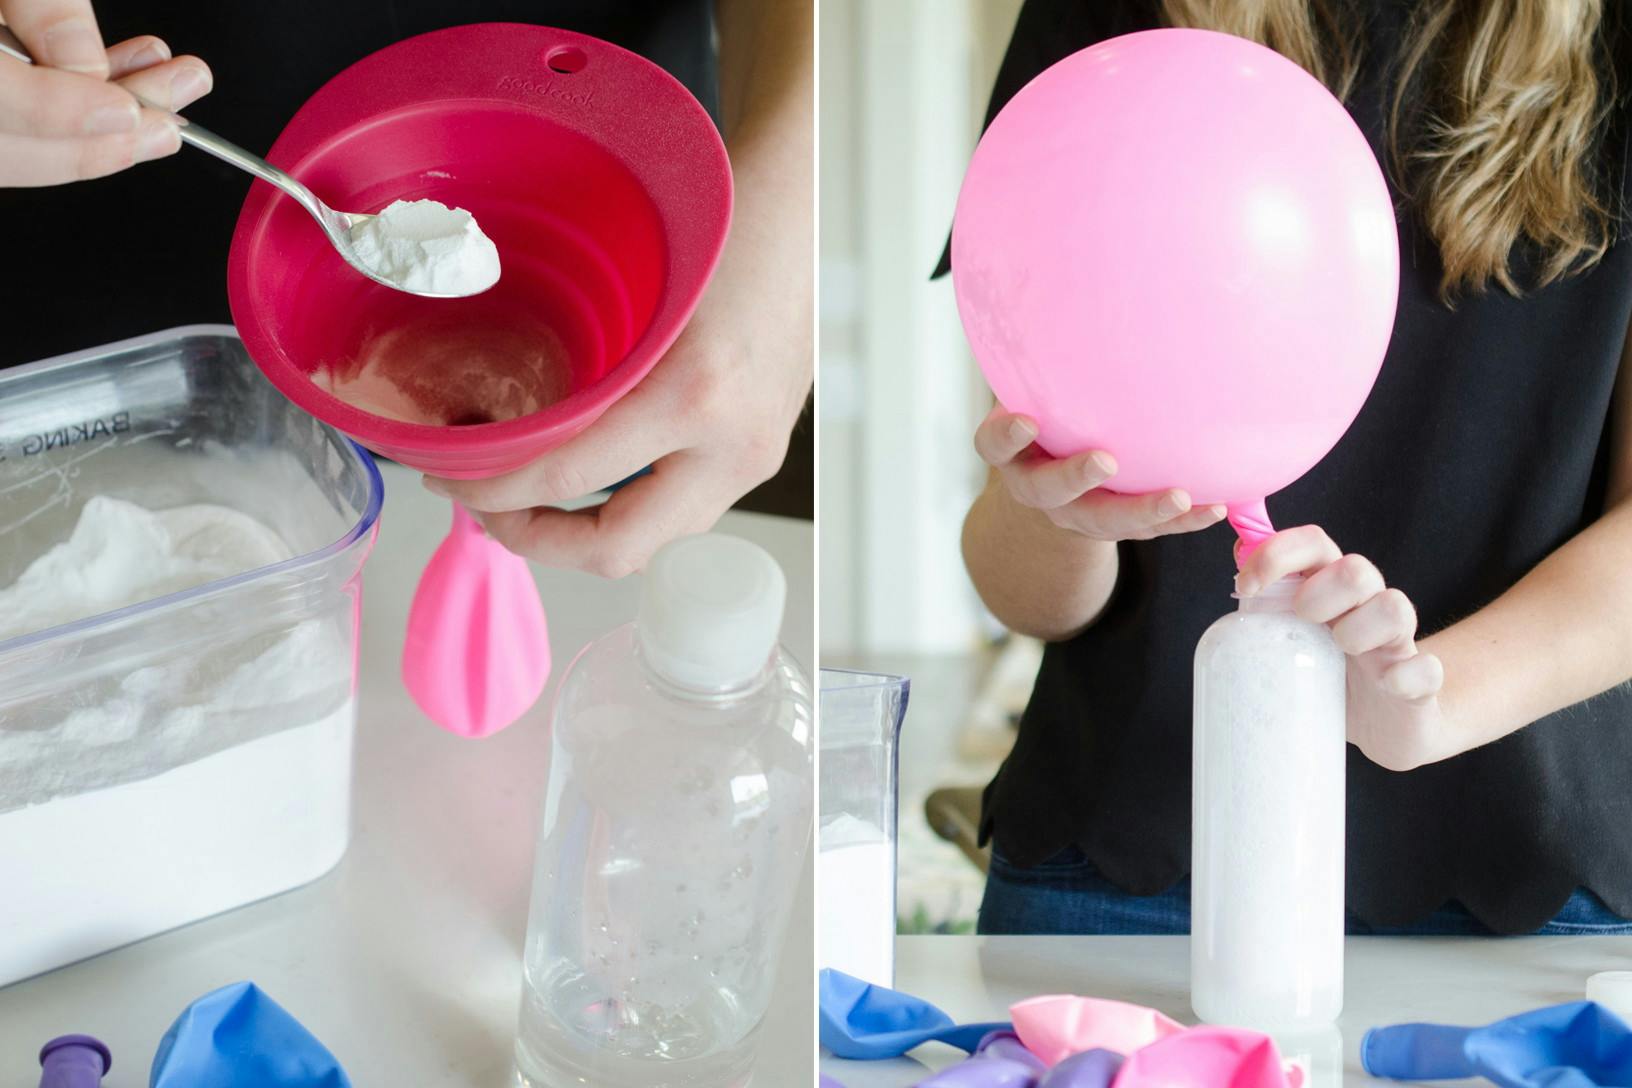 Conduct a science experiment with kids by filling balloons with baking soda and vinegar, then watching them inflate.